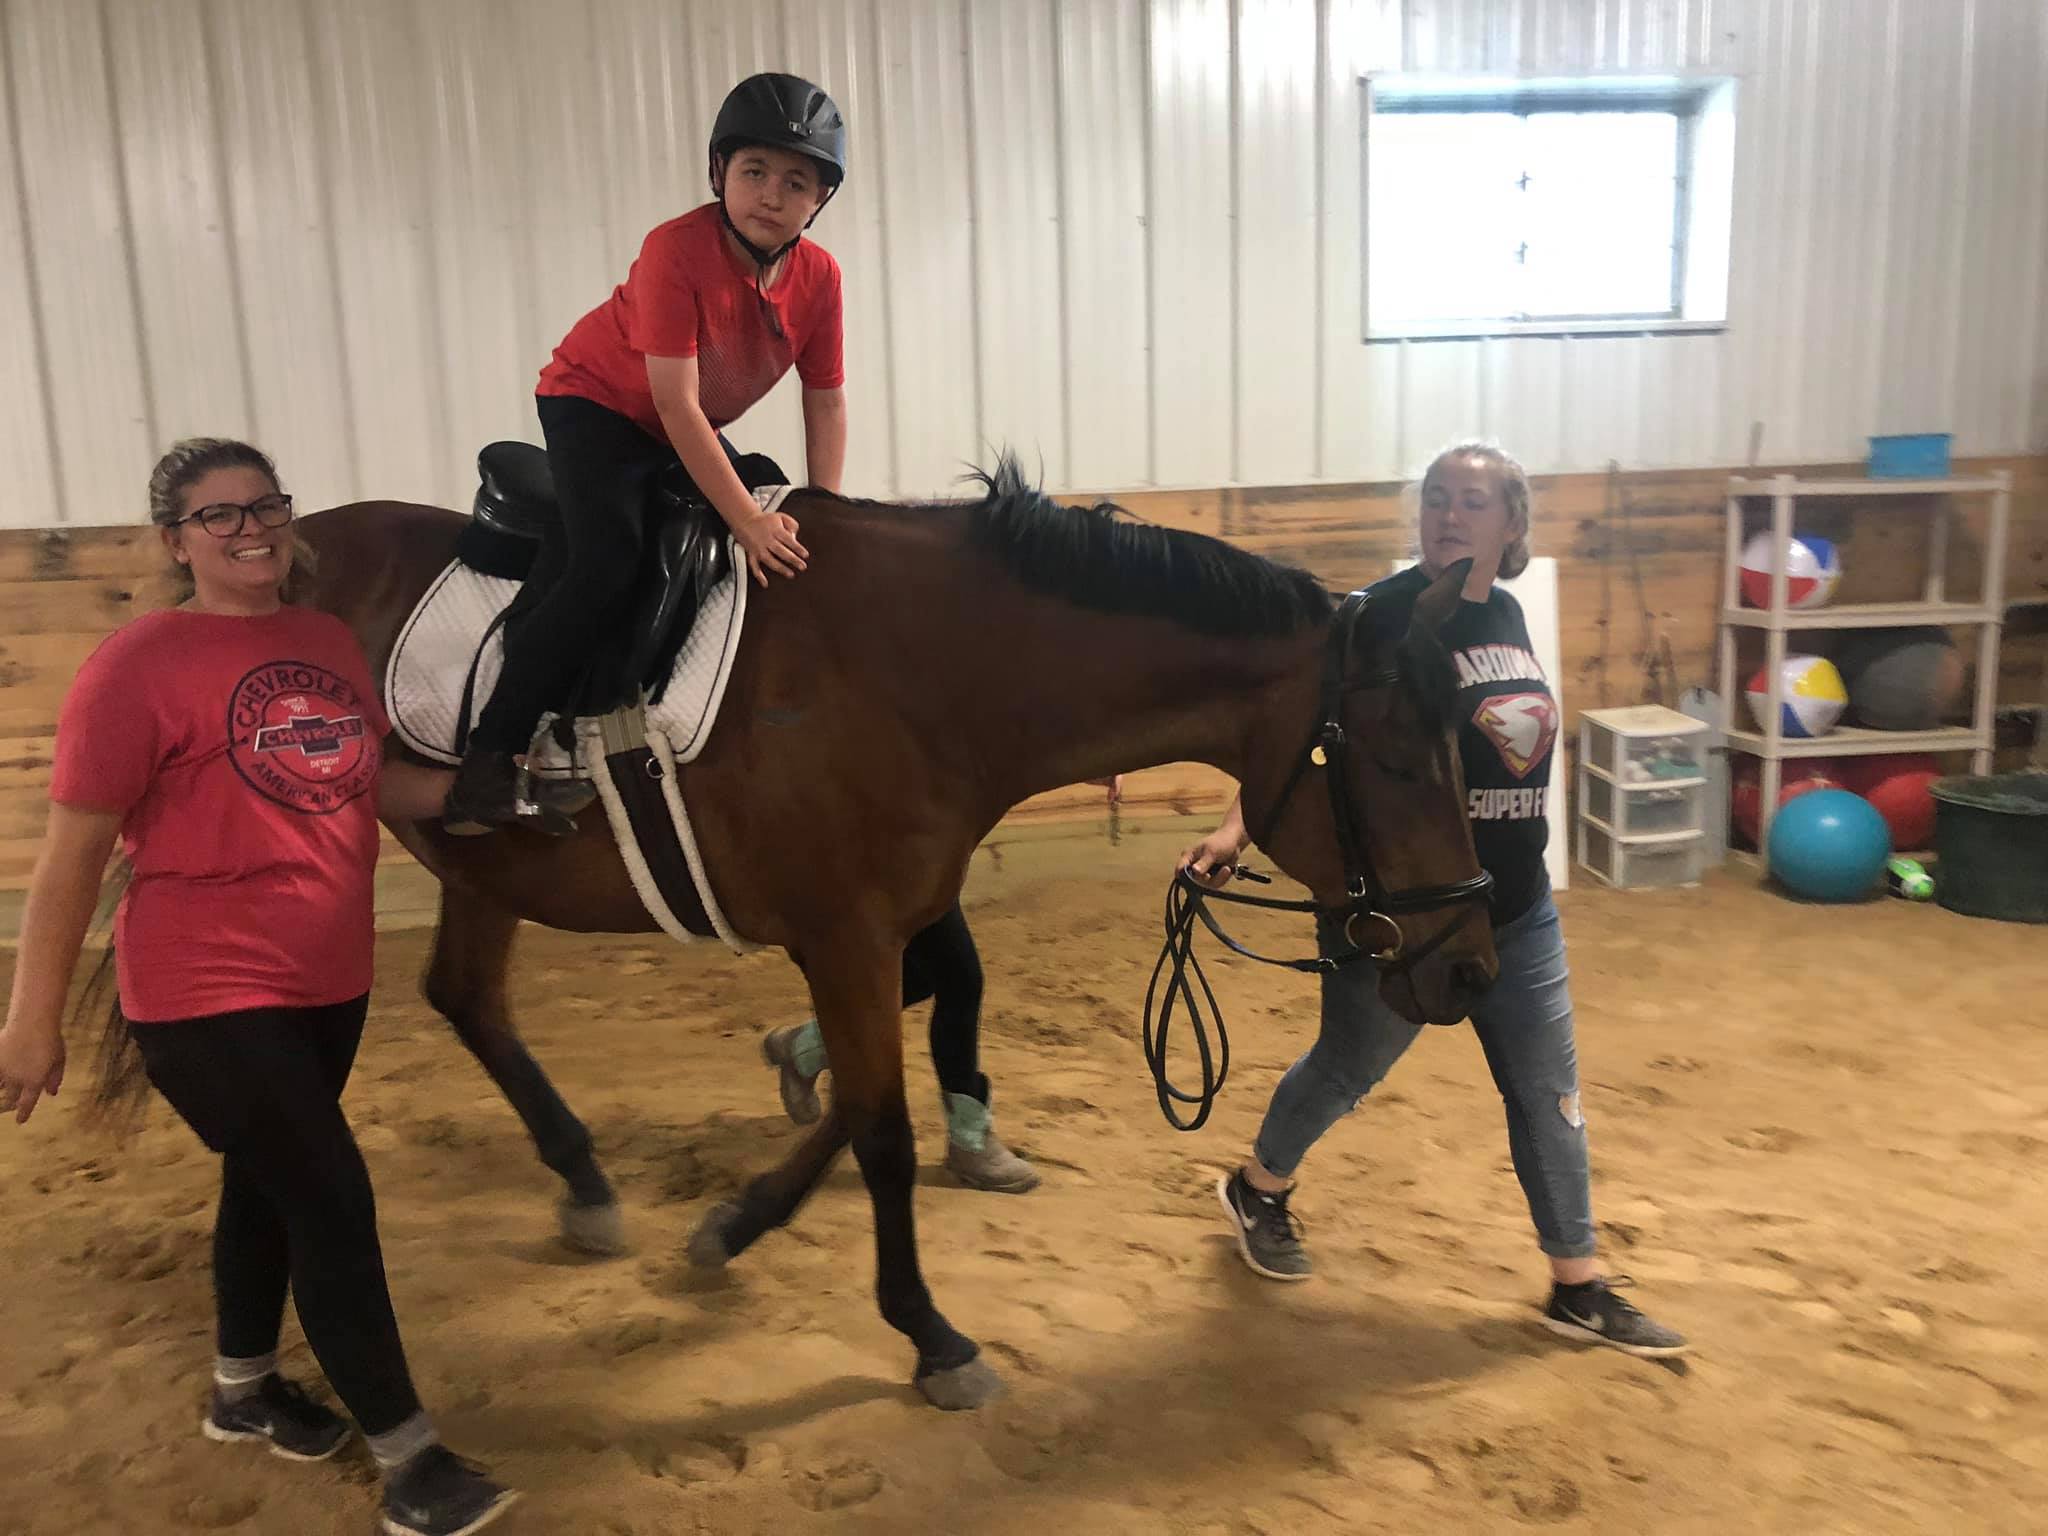 True Friends has a life-changing equine therapy program